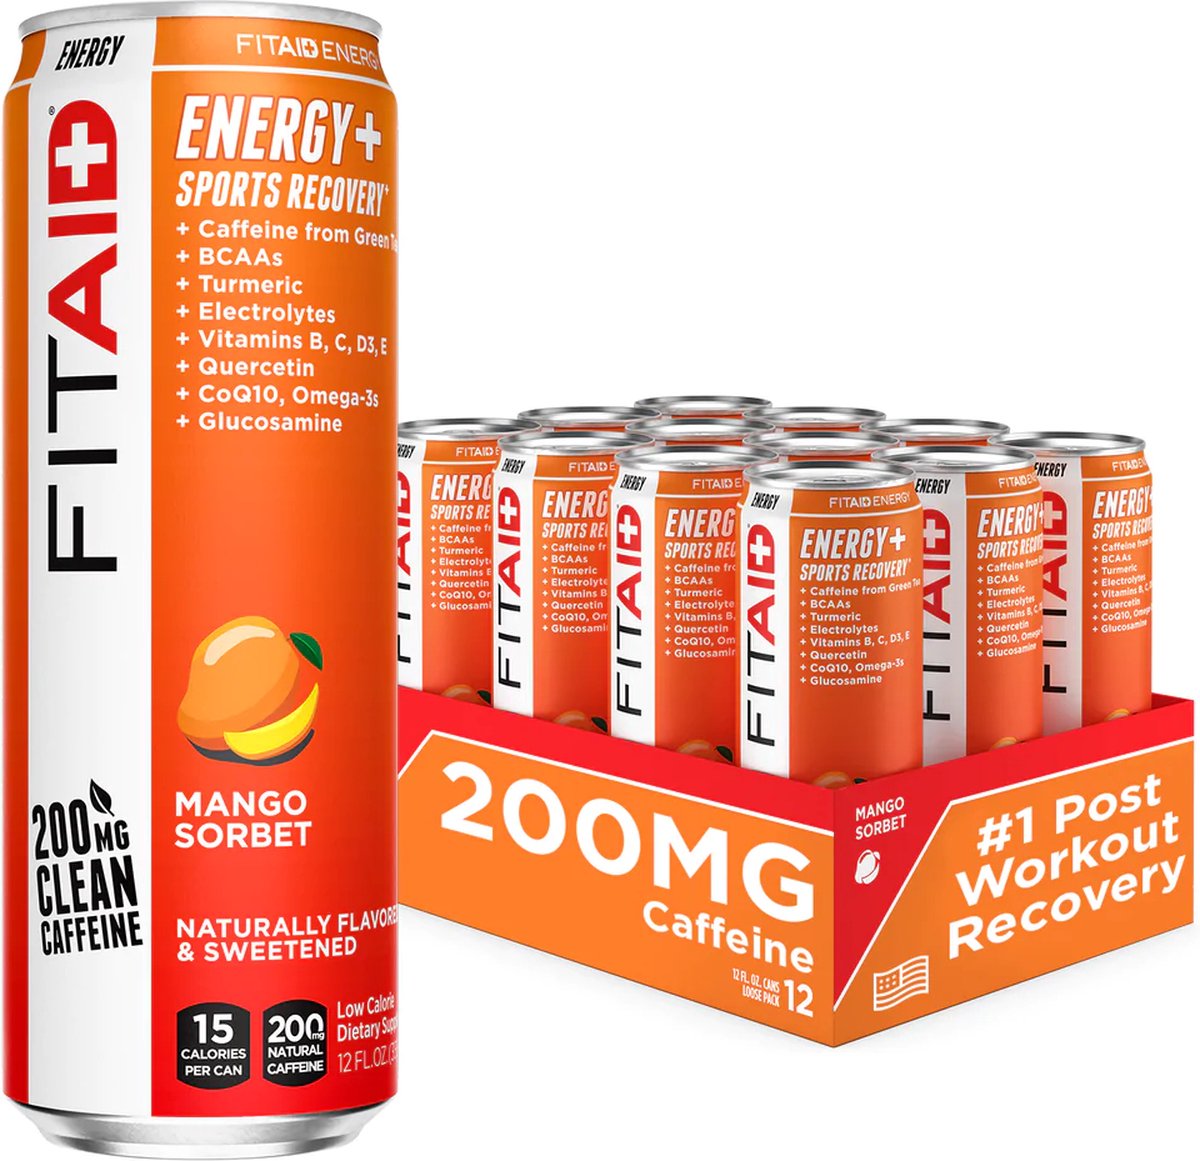 LIFEAID - FITAID - Energy + sports recovery - 355ml x 24 - Mango Sortbet